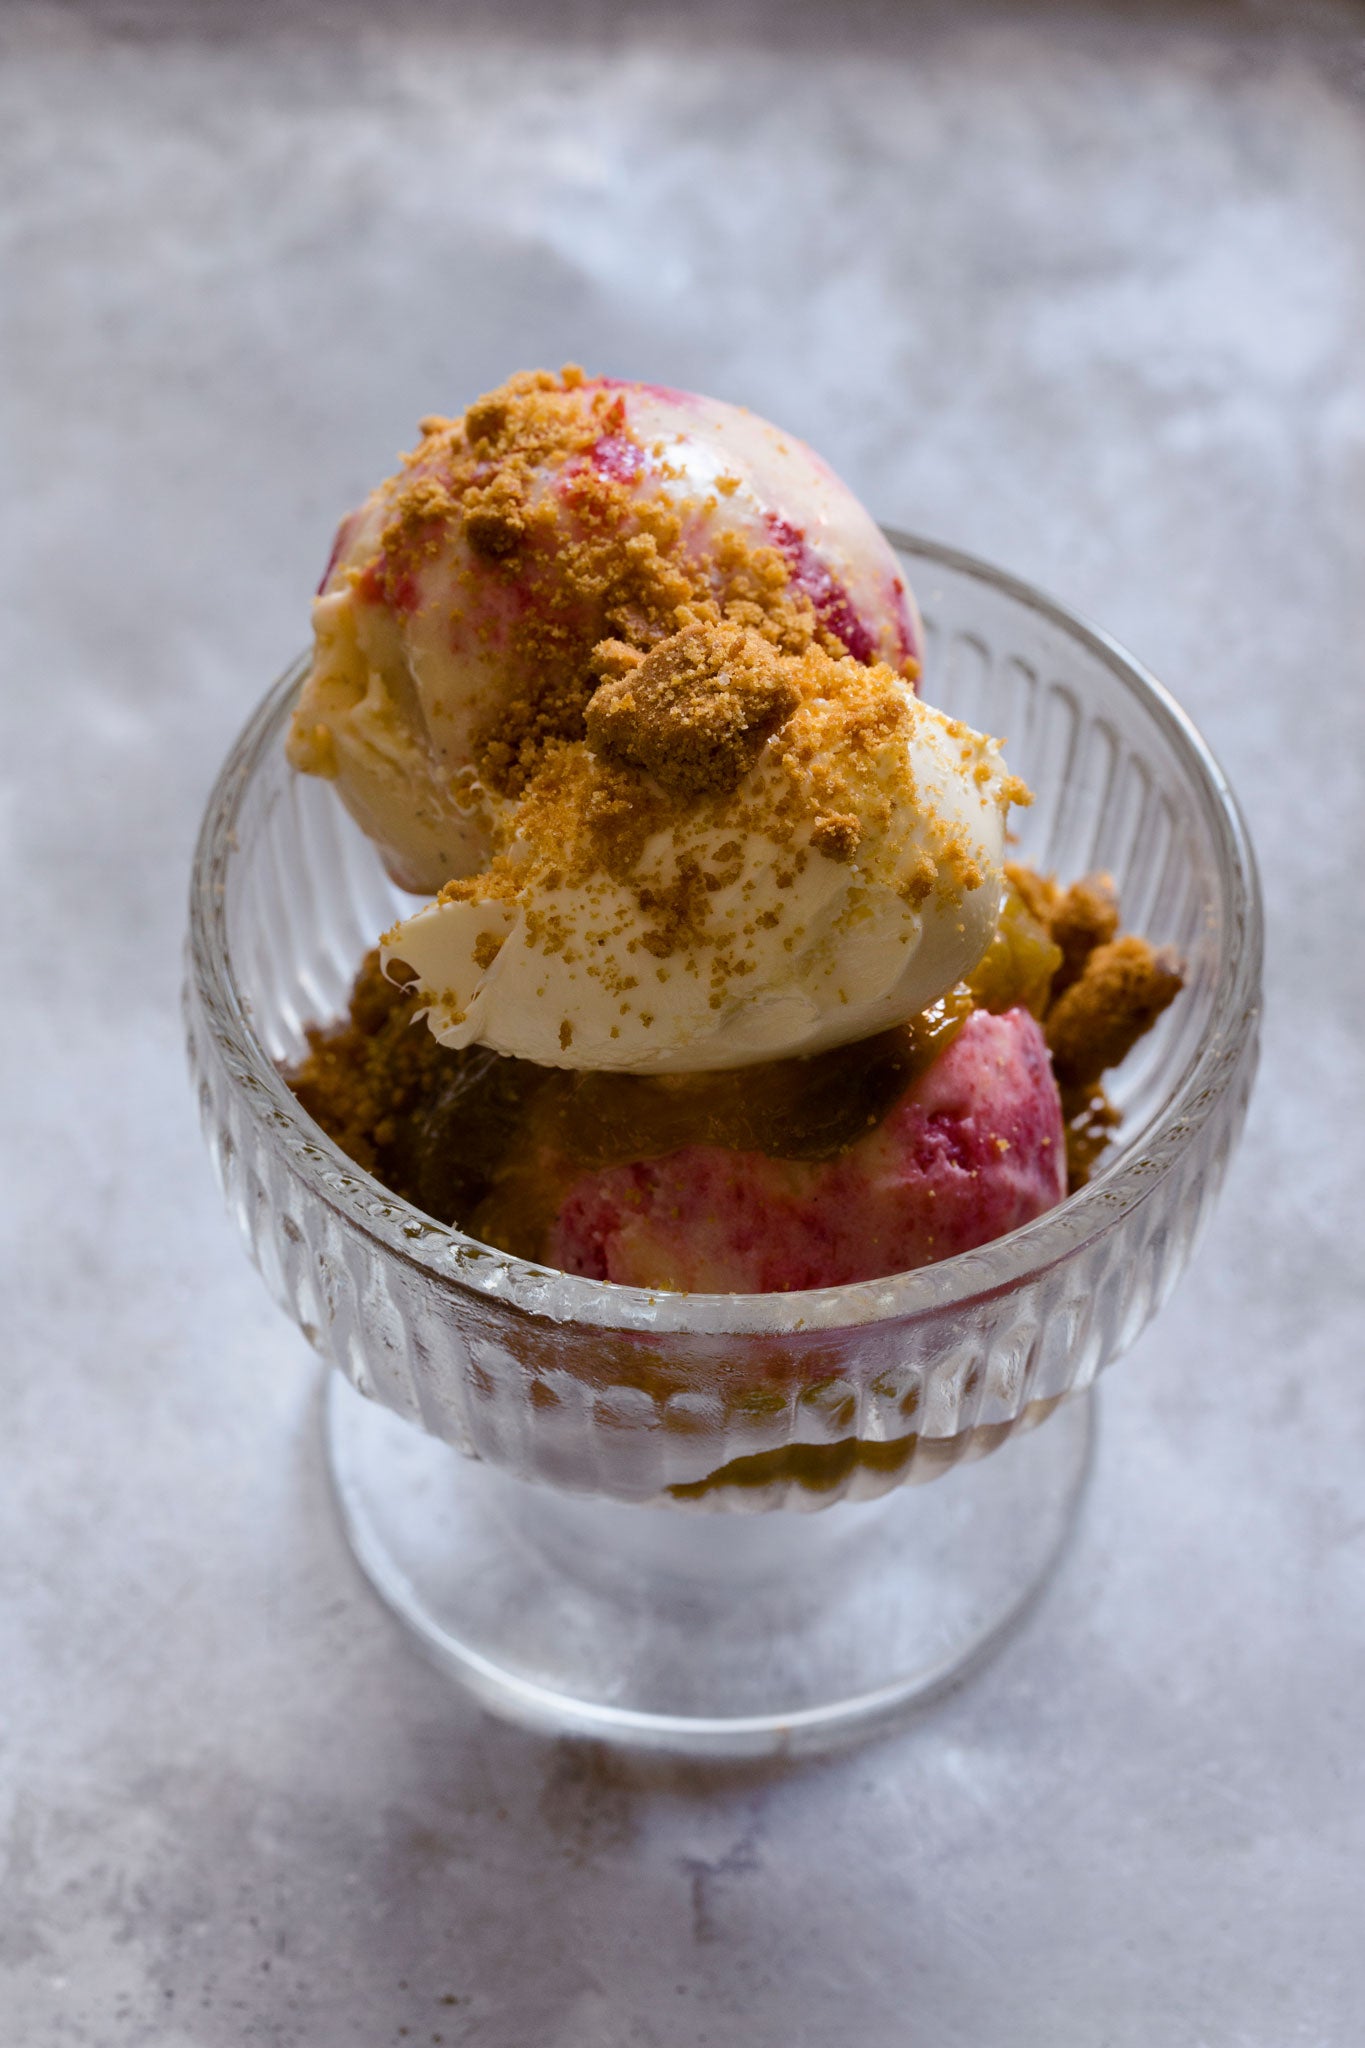 Plum coupe with gingernut biscuits